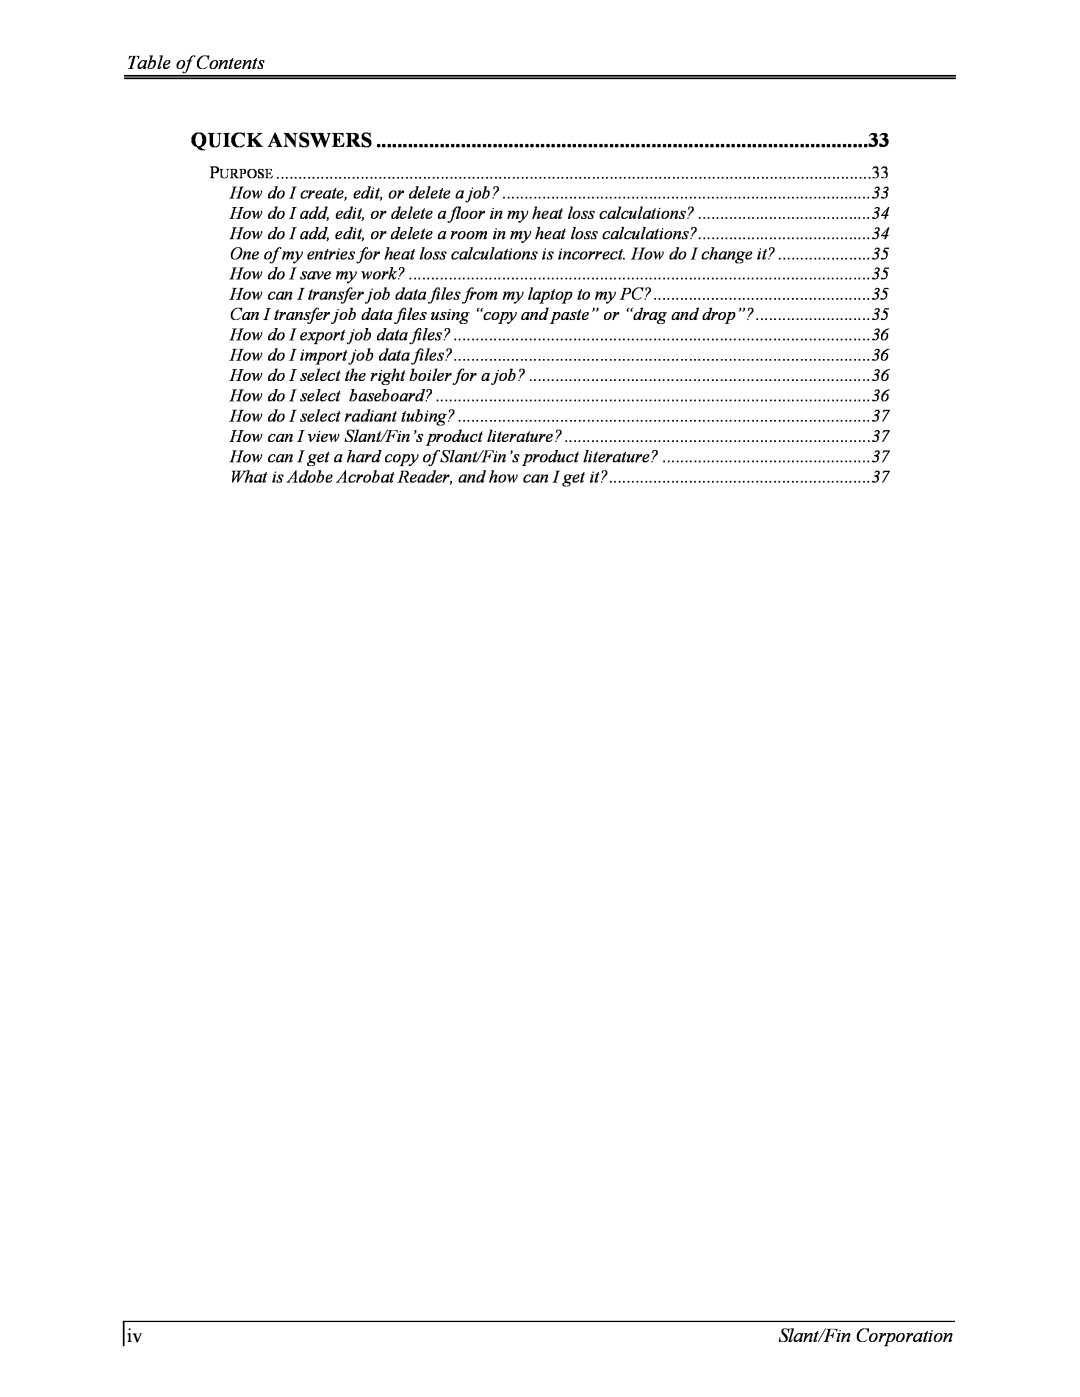 Slant/Fin Hydronic Explorer 2 user manual Quick Answers, Table of Contents, Slant/Fin Corporation 